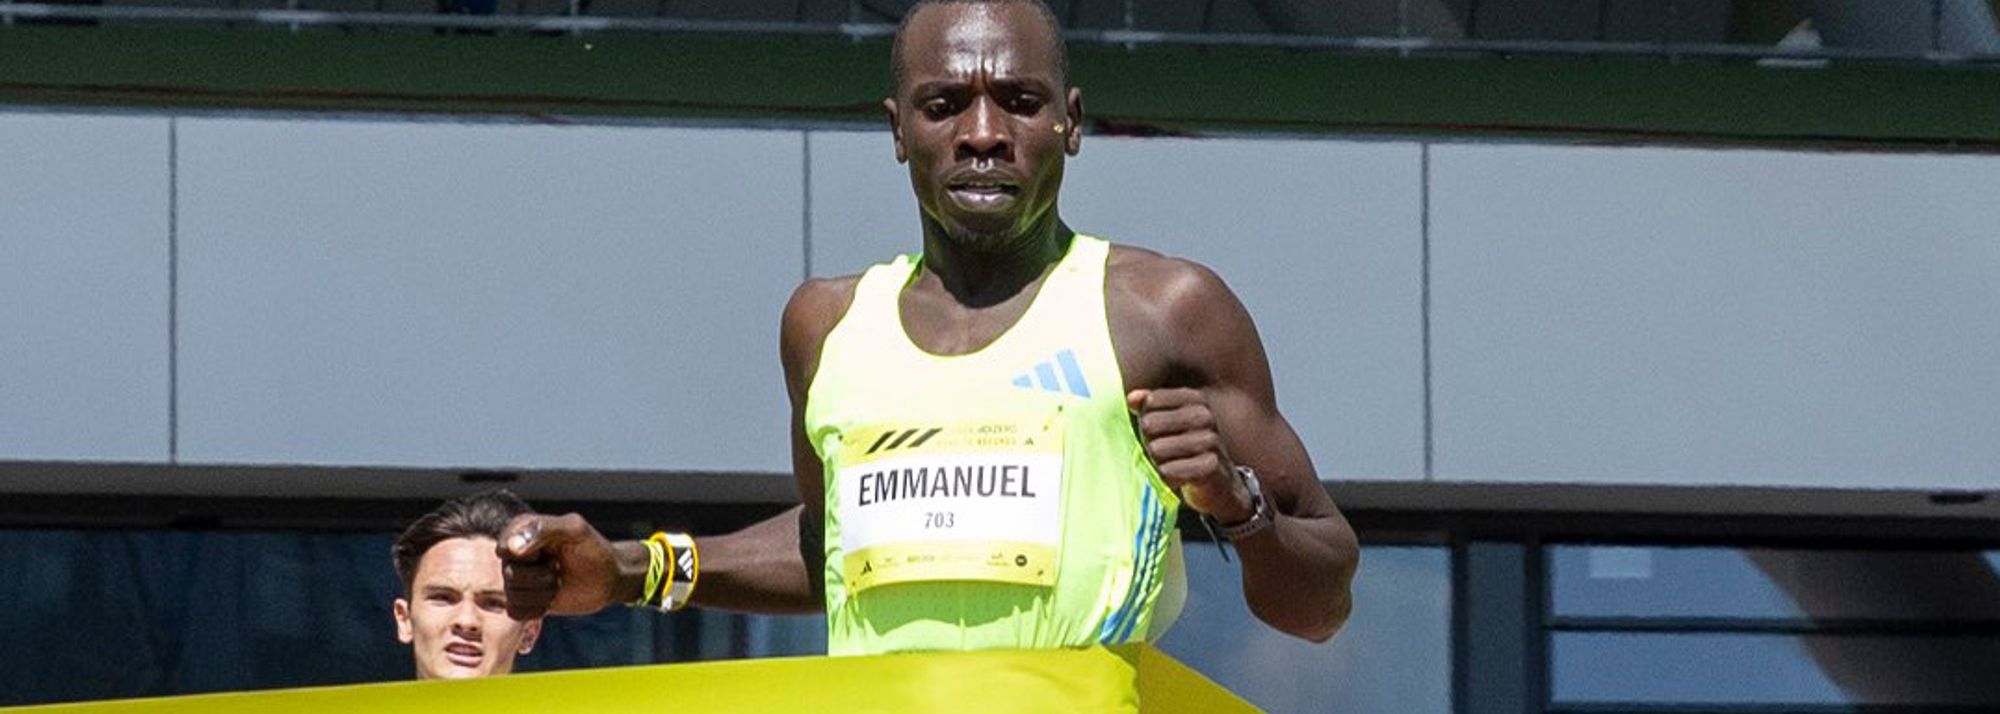 World 800m silver medallist Emmanuel Wanyonyi stepped up to the mile in style, breaking the world road mile record with 3:54.56* at the adizero Road to Records event in Herzogenaurach